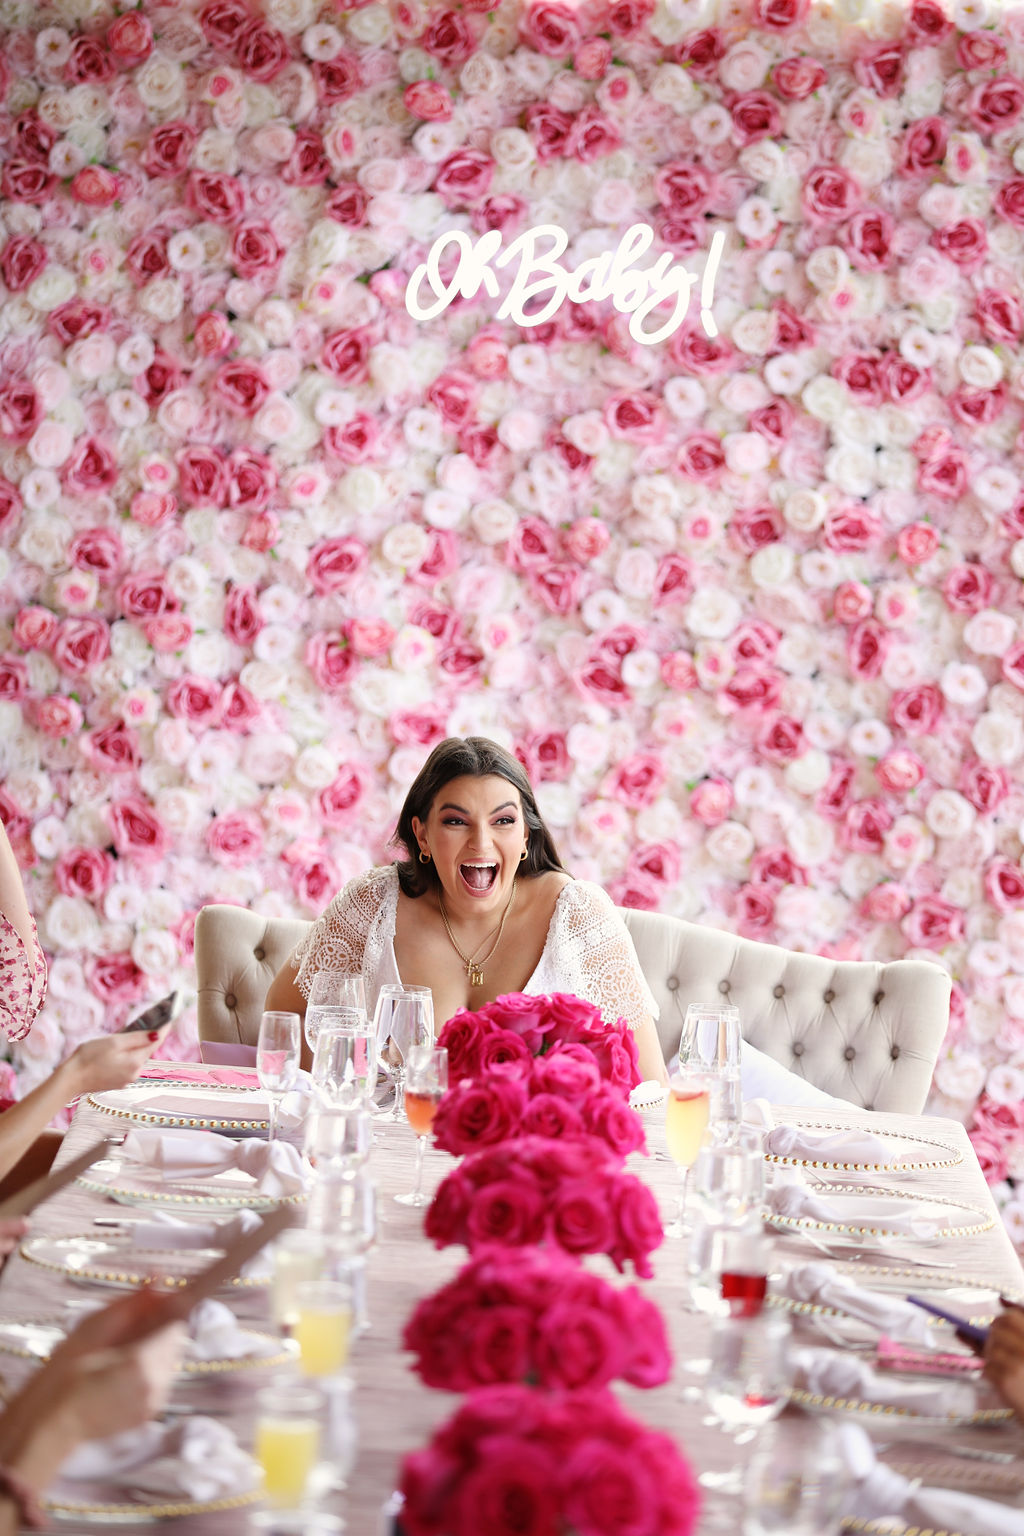 Baby Girl Shower | Orlando Event Planner | Orlando Party Planner | Pink Accents